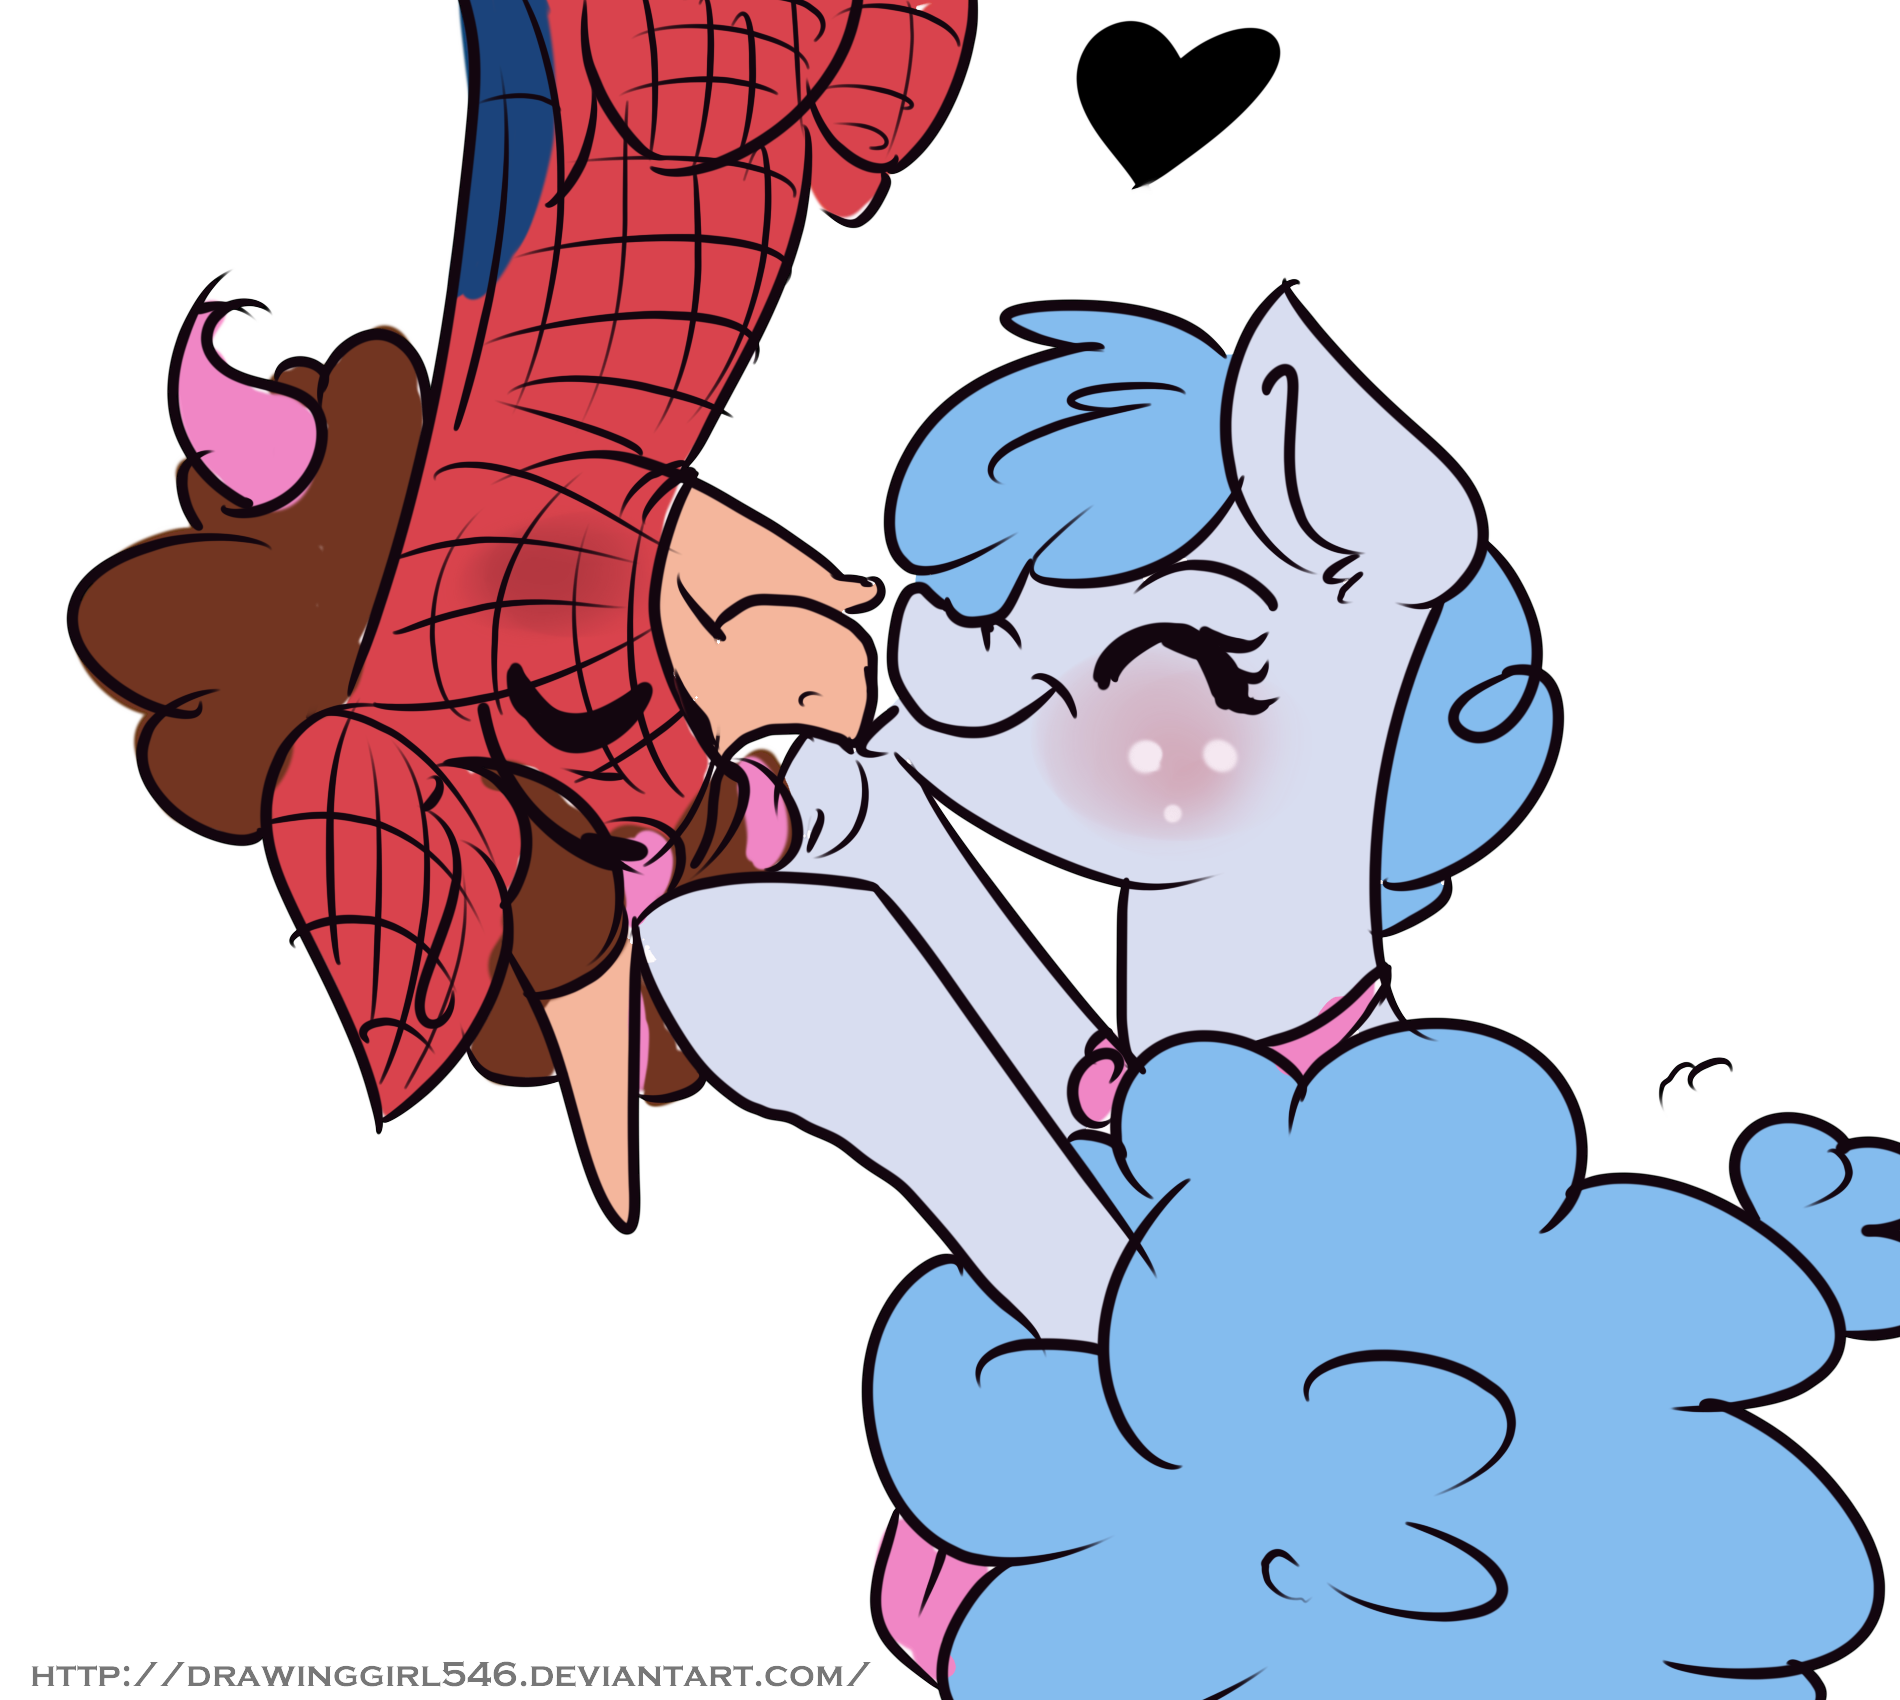 Spiderpink and curly kisses. Goodbye clipart kiss on cheek